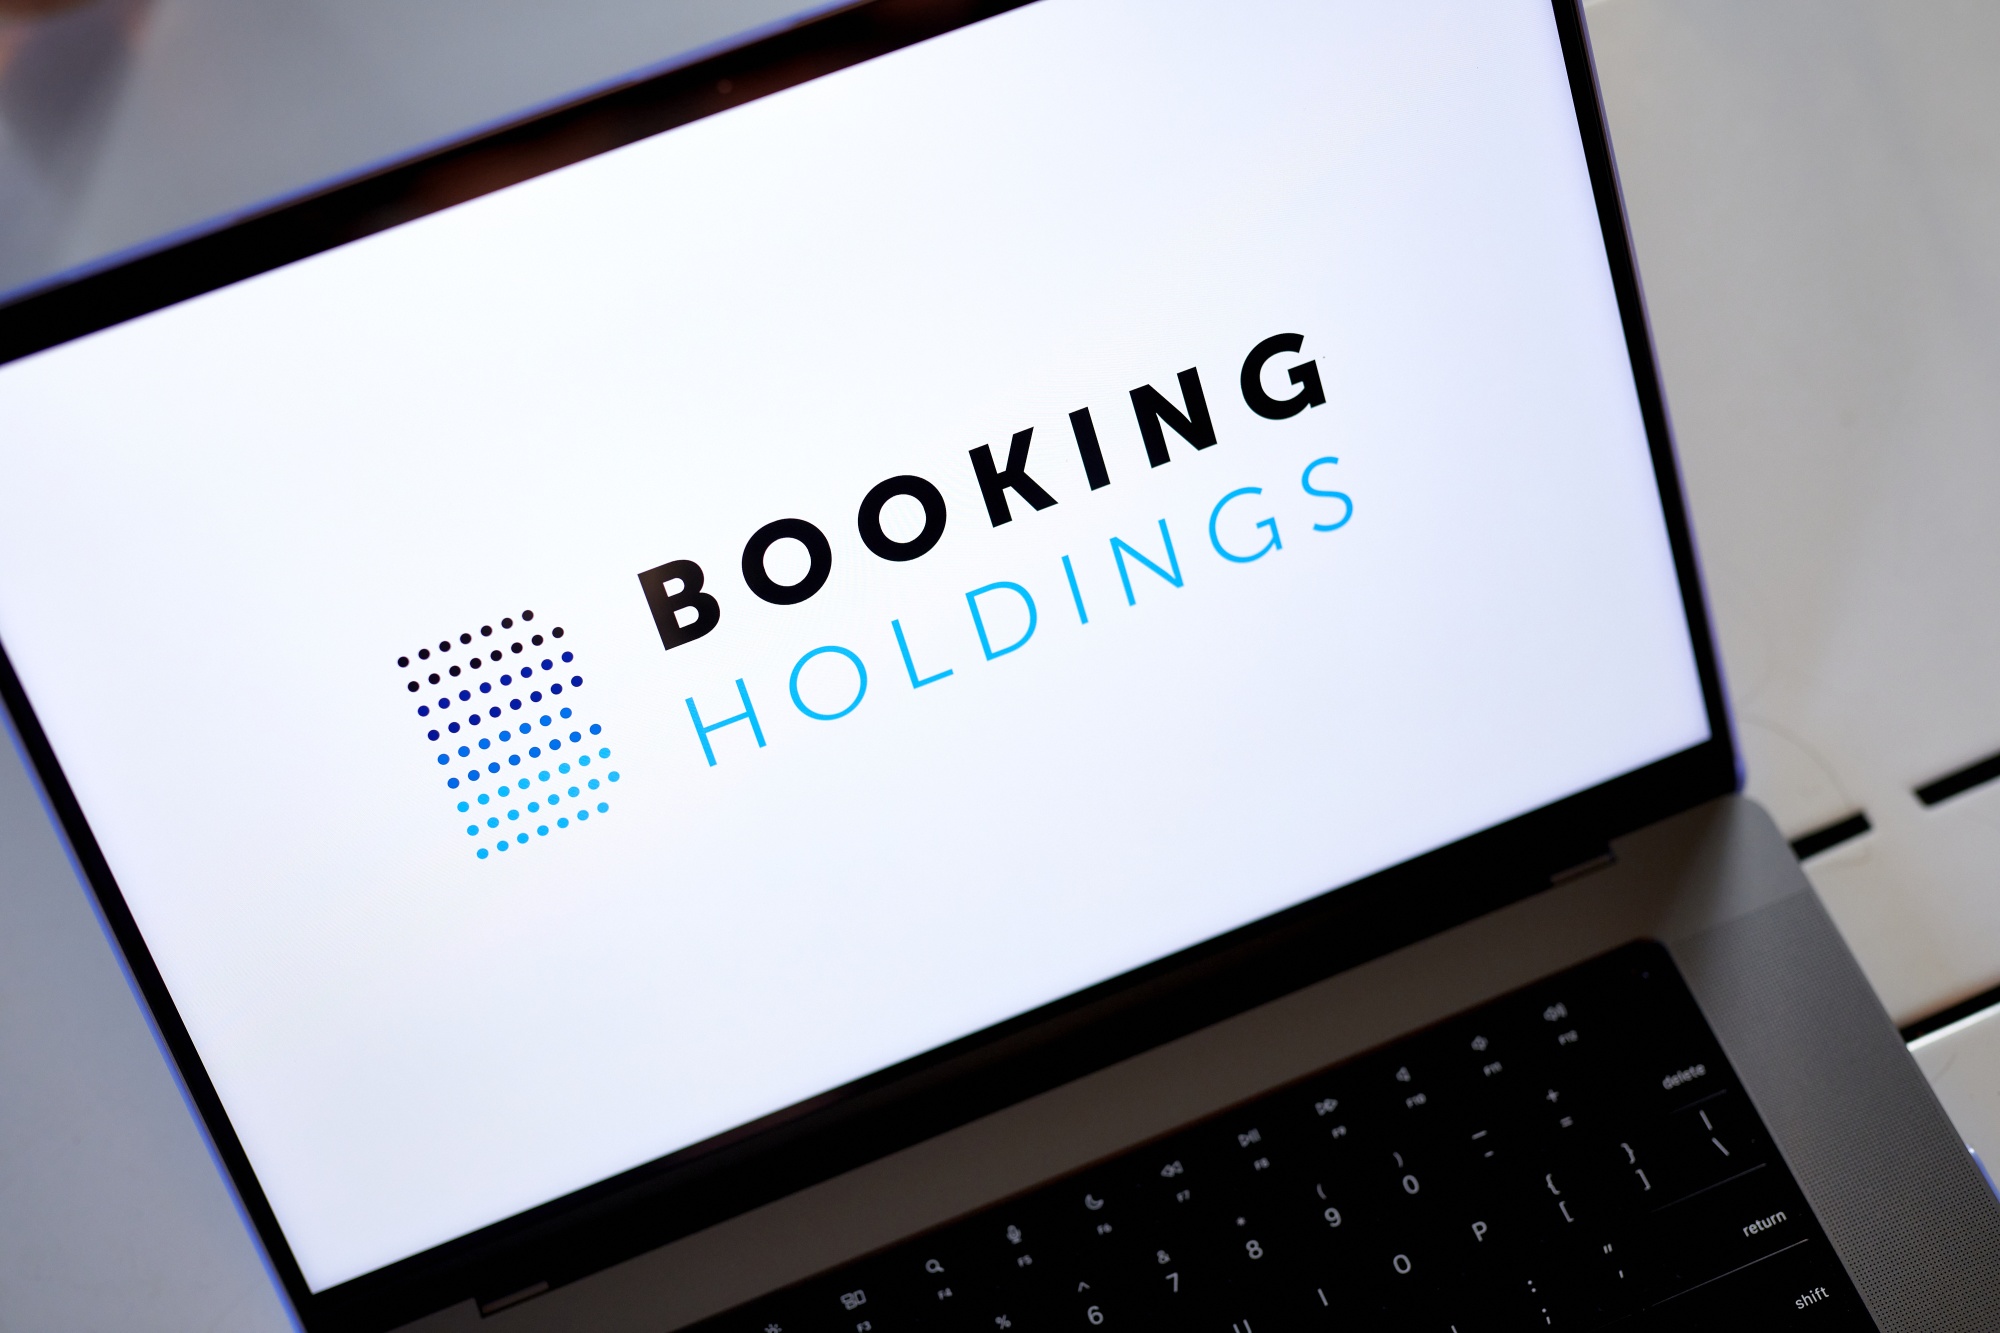 $BKNG: Buying Booking Holdings Stock in a Pullback